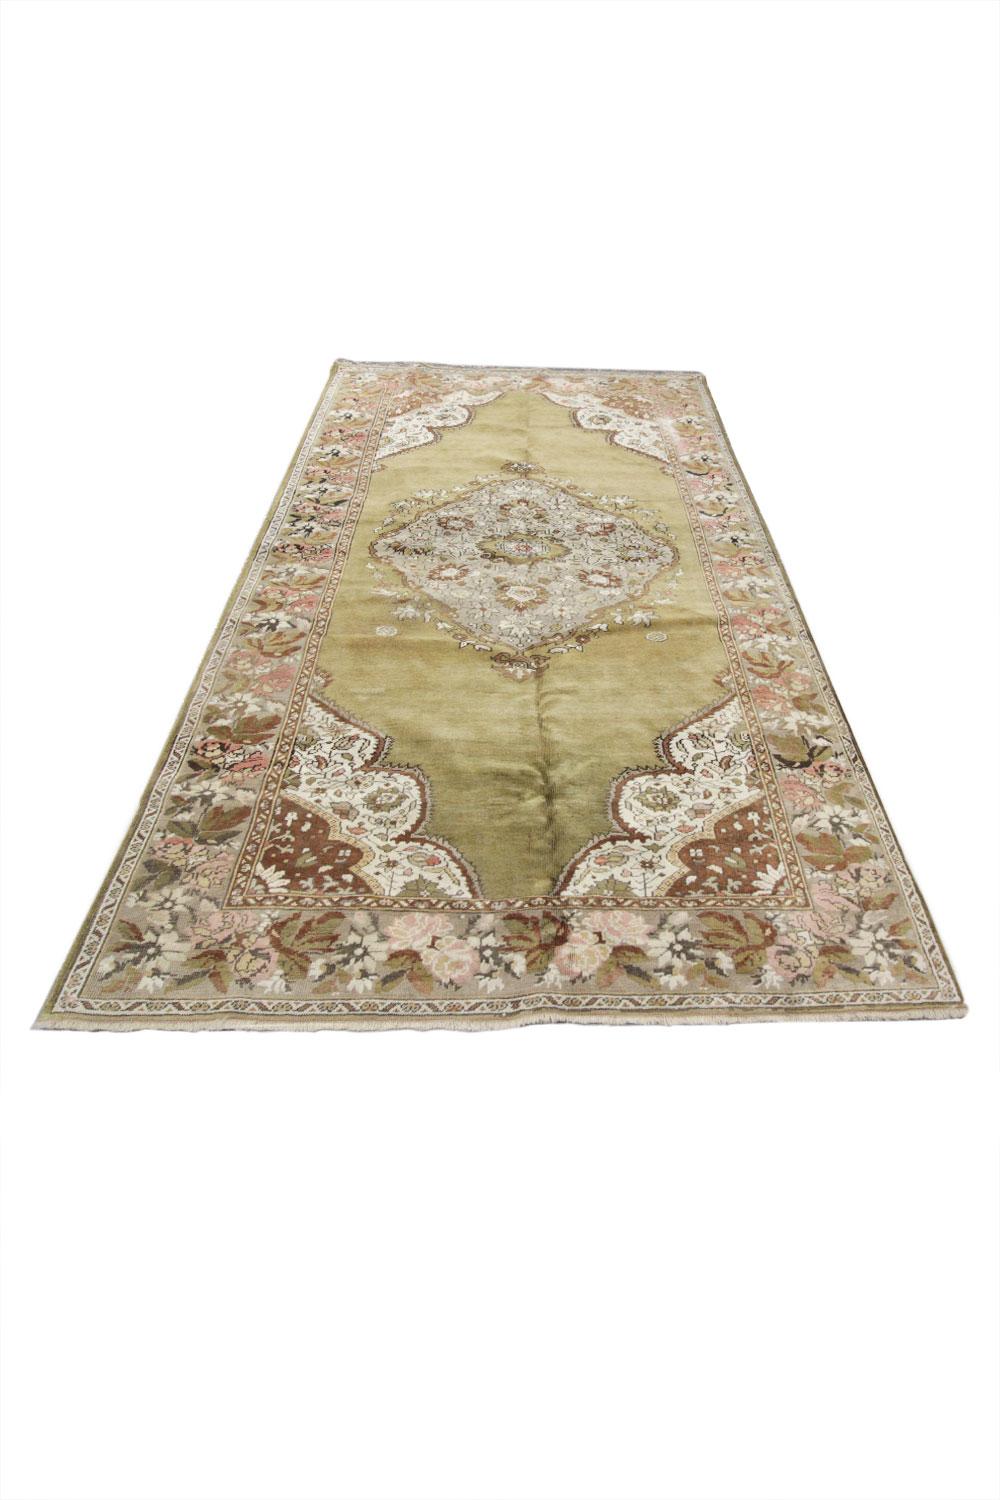 Handmade carpet muted tones of olive green, pink and beige sit in harmony on this large area rug. Handwoven with the finest handspun cotton and wool, which is dyed using organic vegetable dyes. A large central medallion makes this handmade rug stand